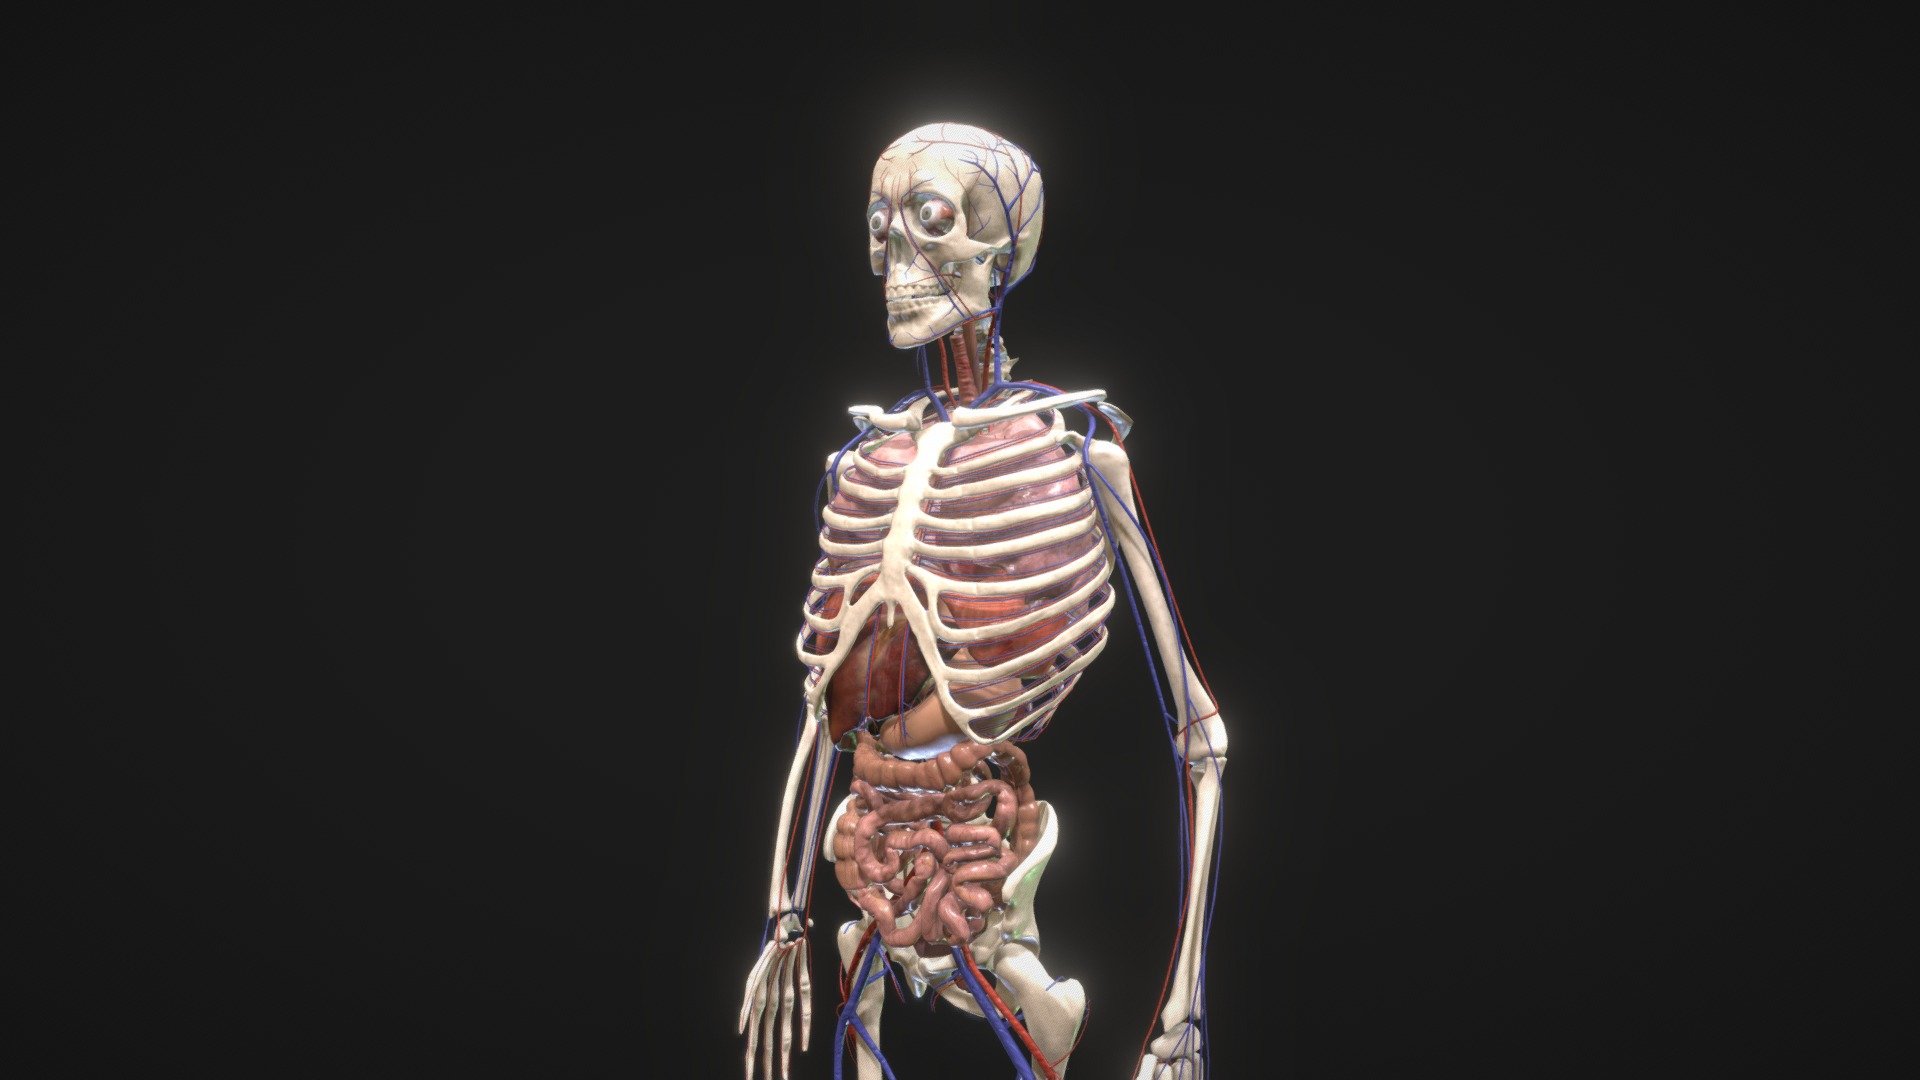 Low Poly animated human body with PBR textures (AR/VR ready).

The model includes:
1. Animated Skeleton 
2. Human Brain
3. Animated Digestive System
4. Animated Lungs
5. Animated Heart
6. Diafragma
7. Urinary System
8. Liver
9. Gallbladder
10. Human Eyes
11. Animated Circulatory System

All parts are detachable 3d model